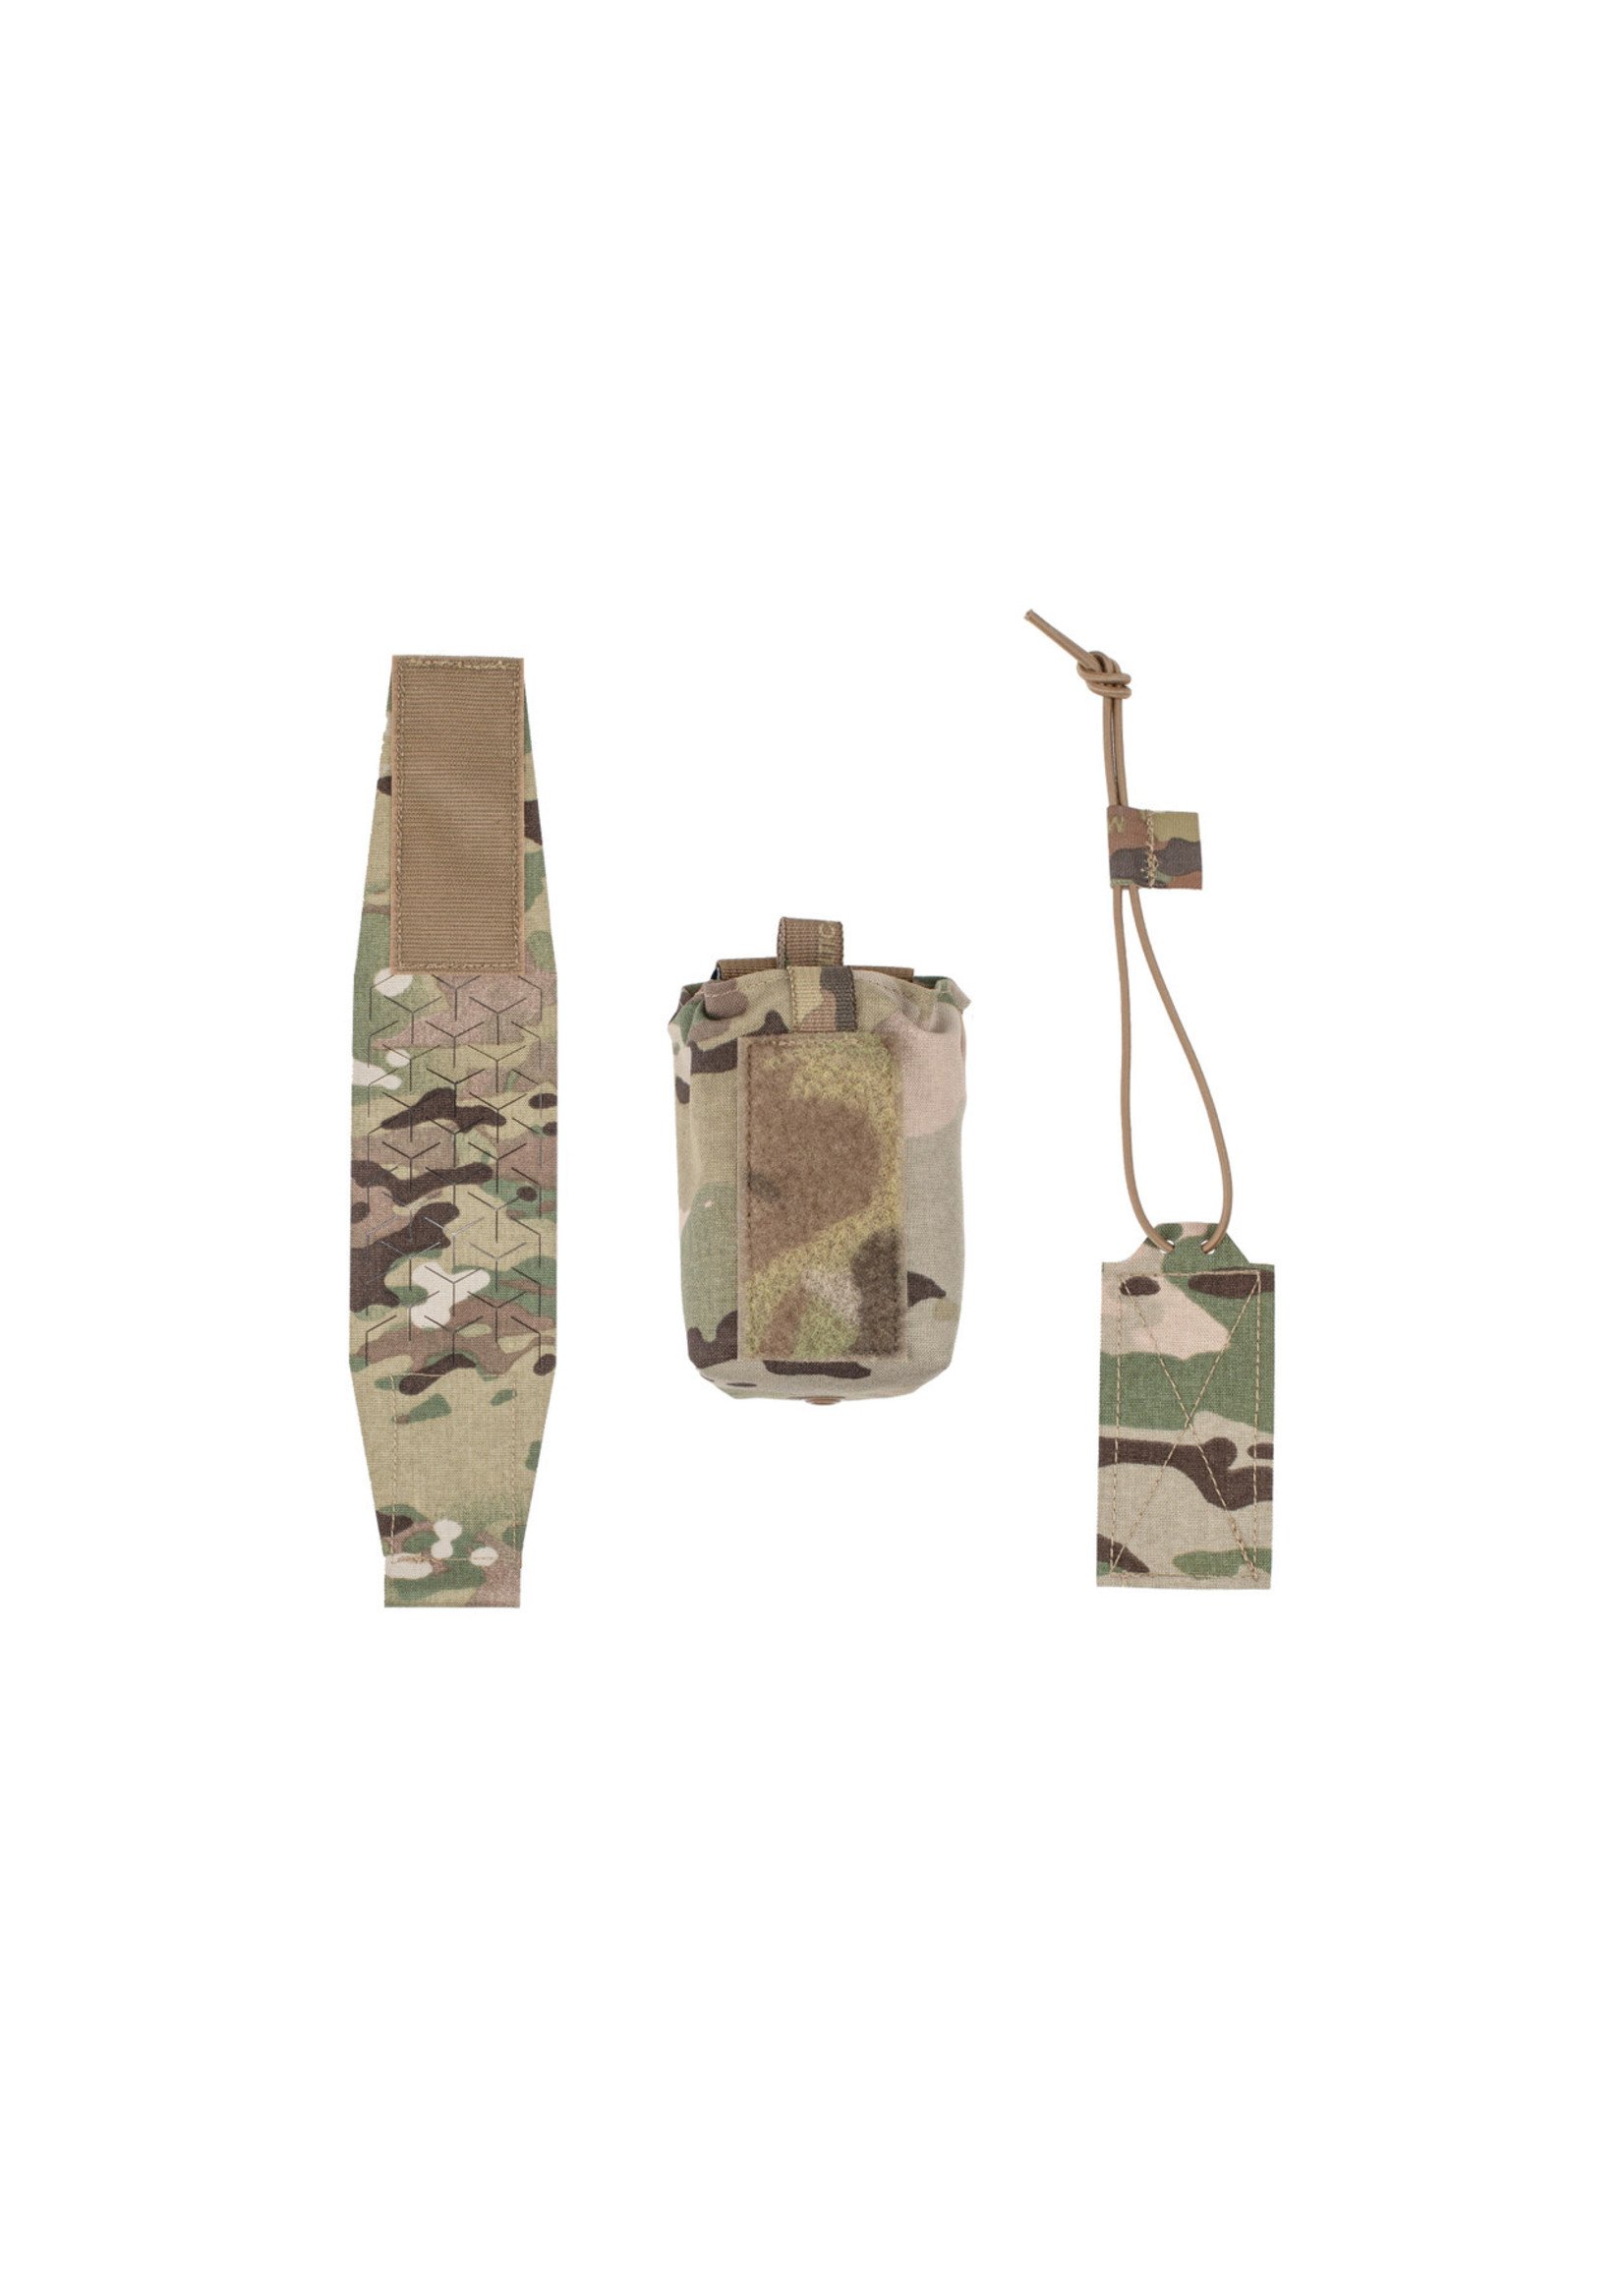 SPIRITUS SYSTEMS SPUD POUCH - SDTAC